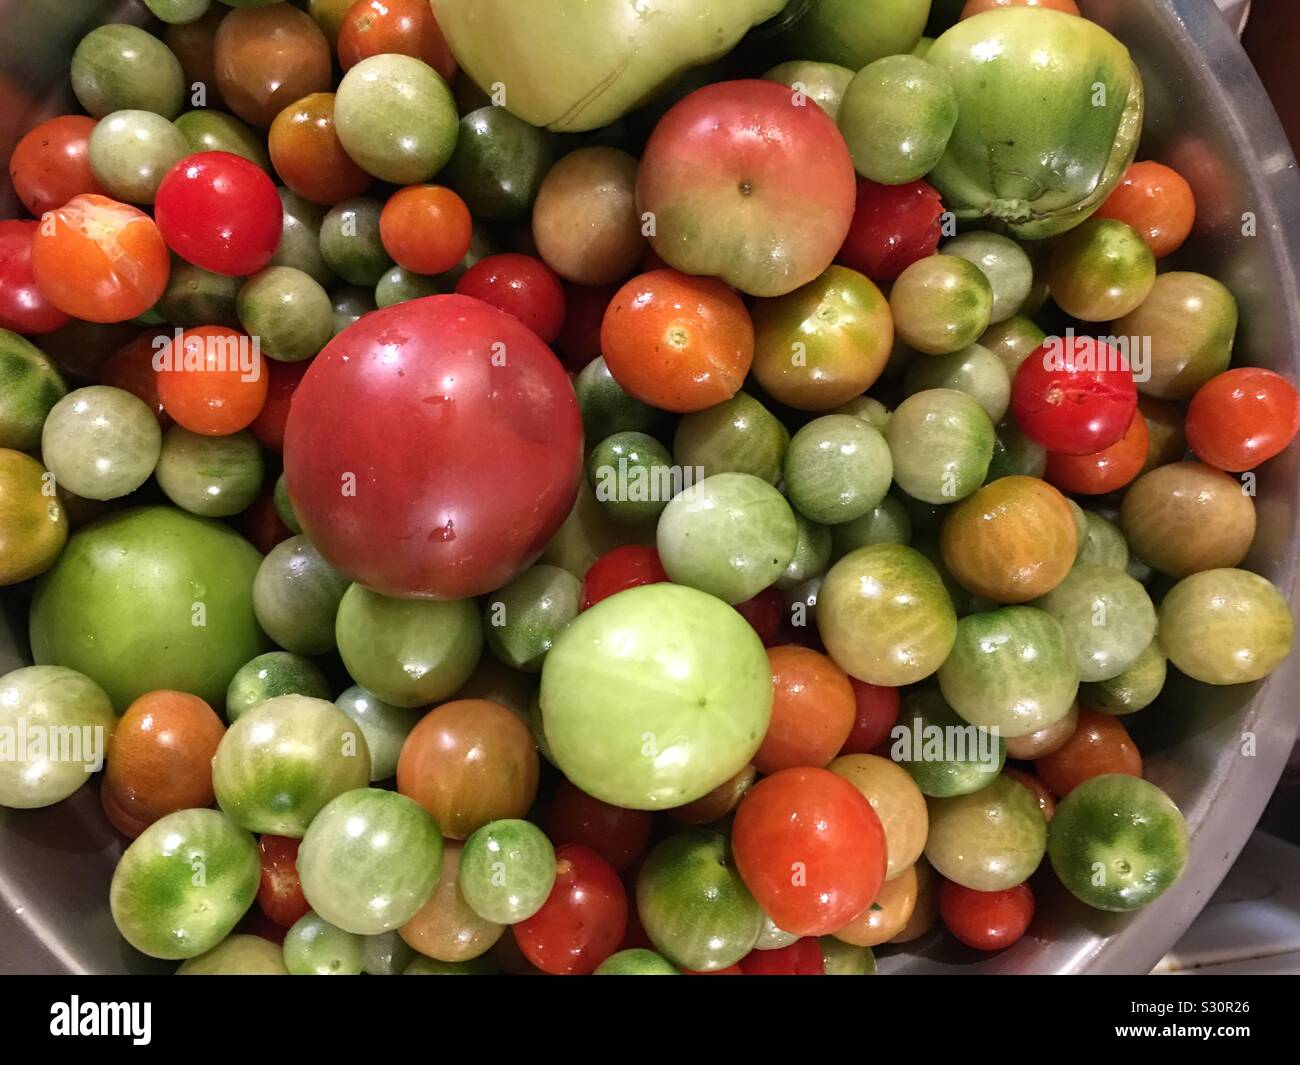 All kinds of tomatoes Stock Photo